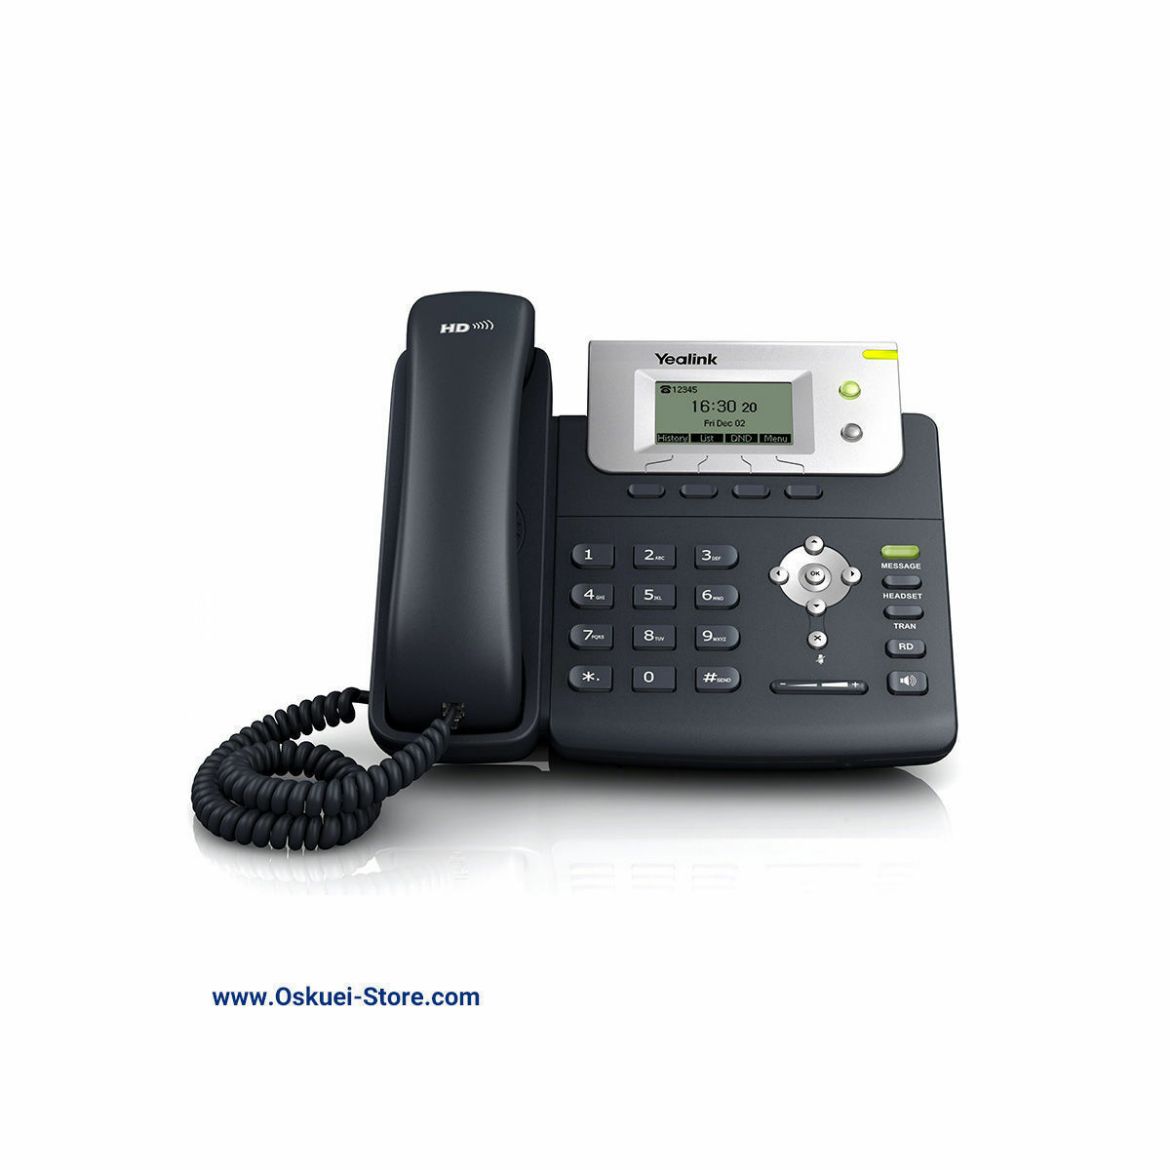 Yealink T21 VoIP SIP Telephone Black Front